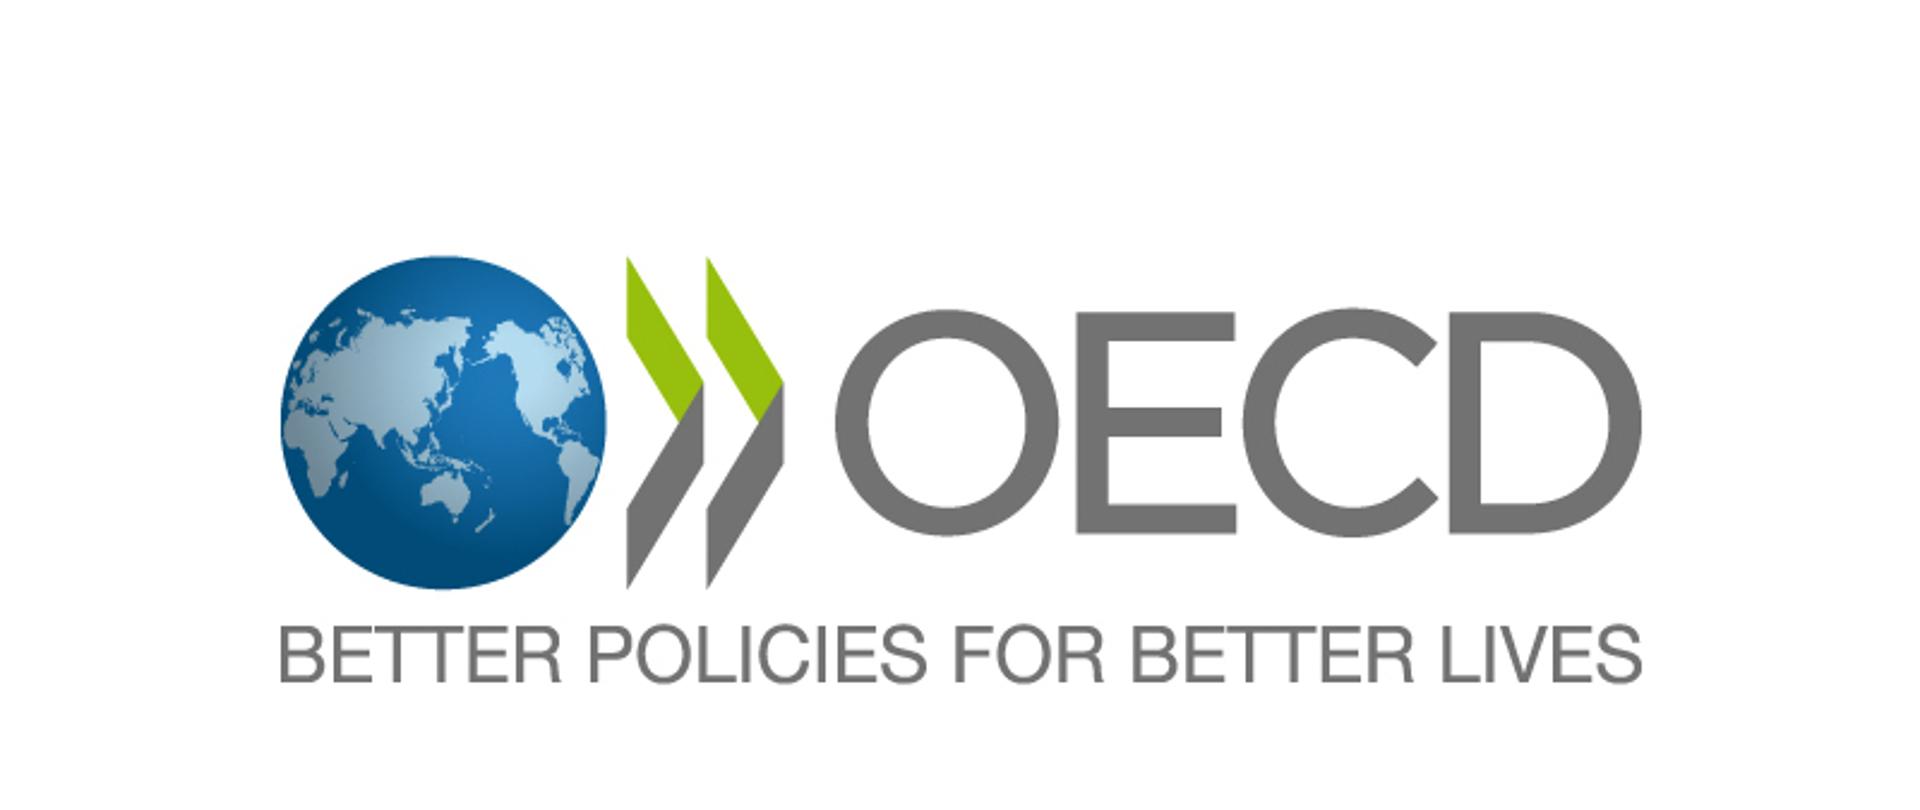 Logo and sign Better policies for better lives